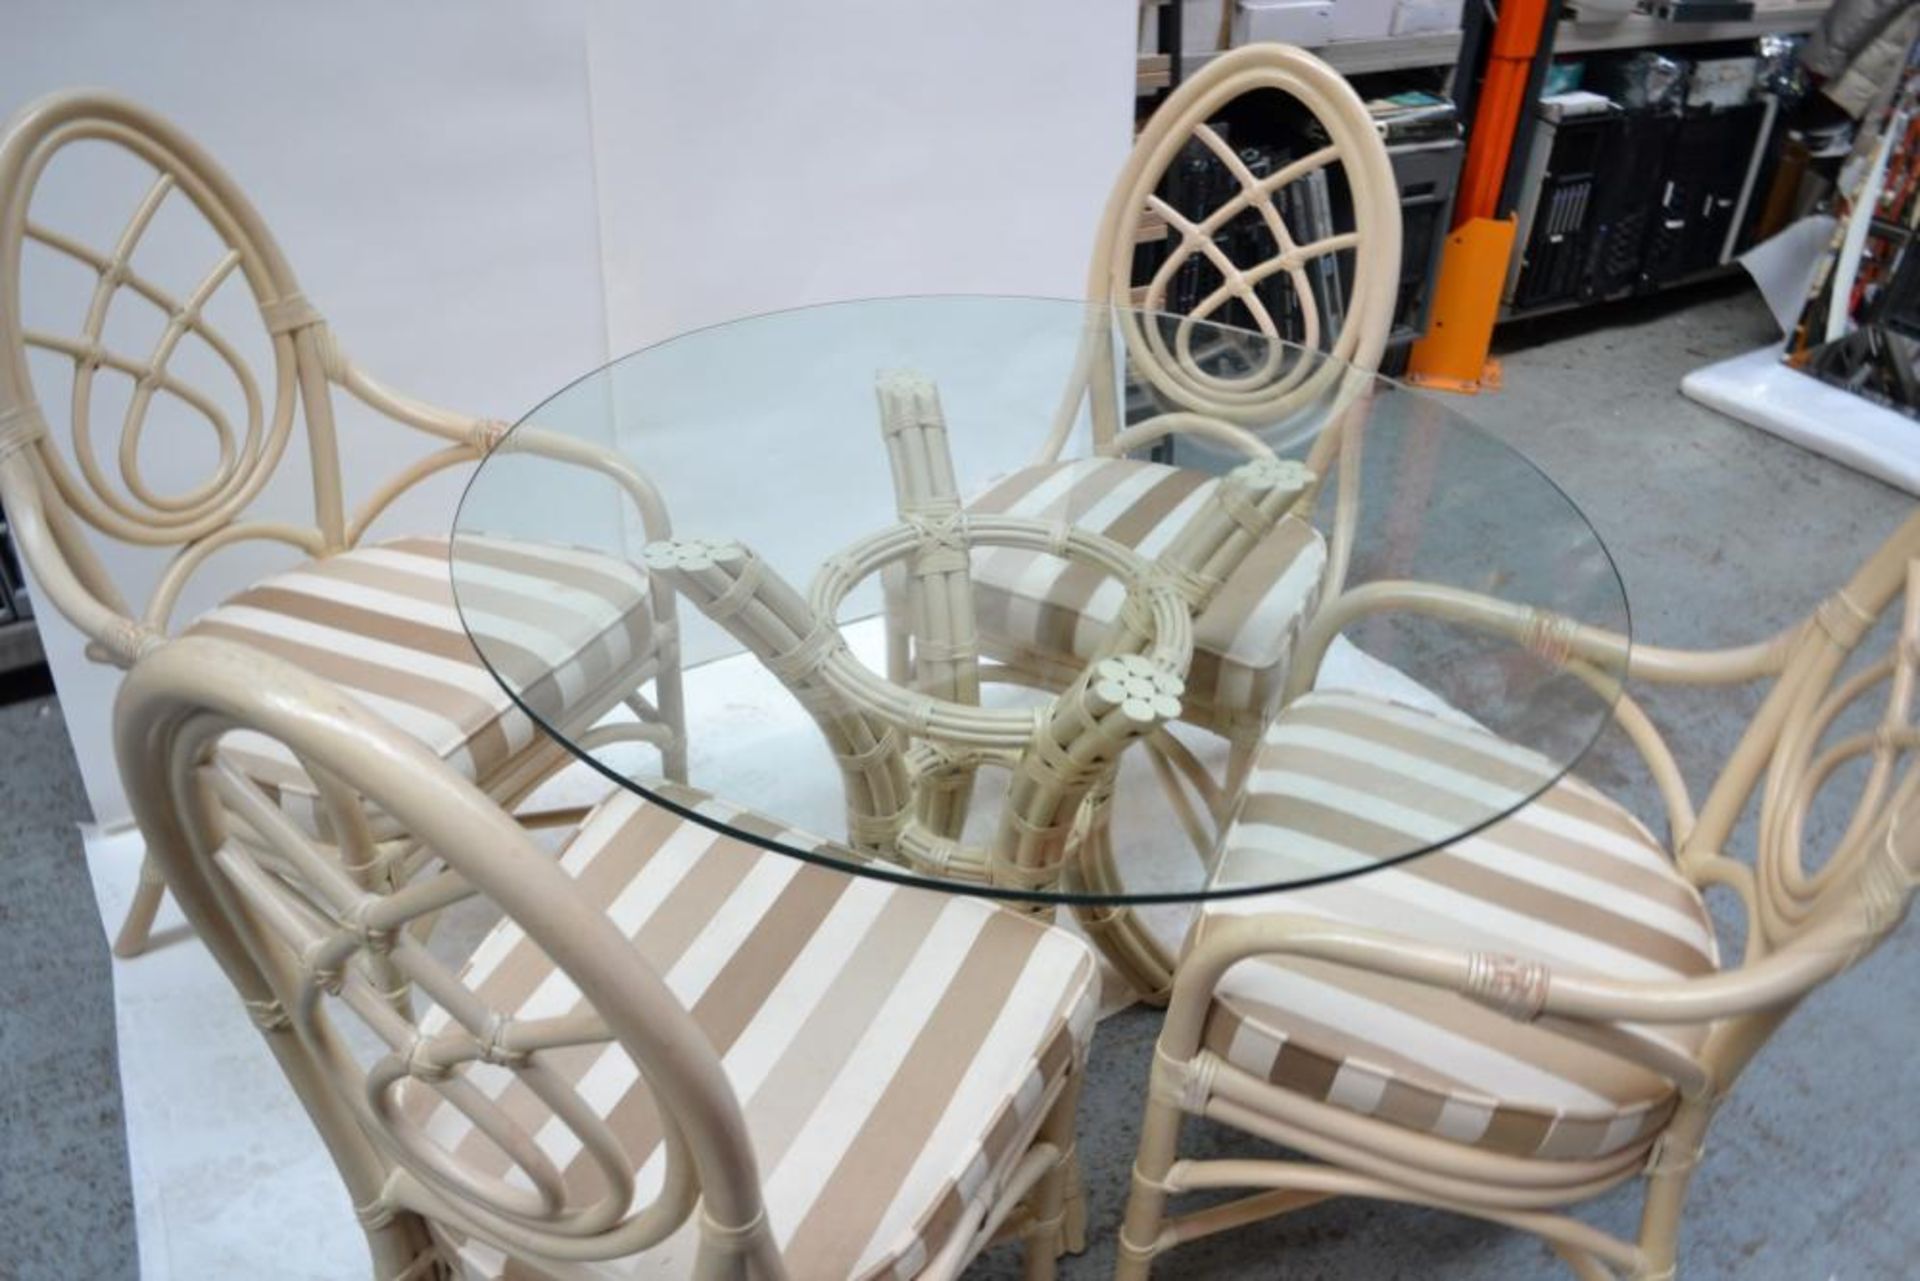 Glass Topped Cane Table with 4 Chairs - Pre-owned In Good Condition - AE010 - CL007 - Location: Altr - Image 4 of 13